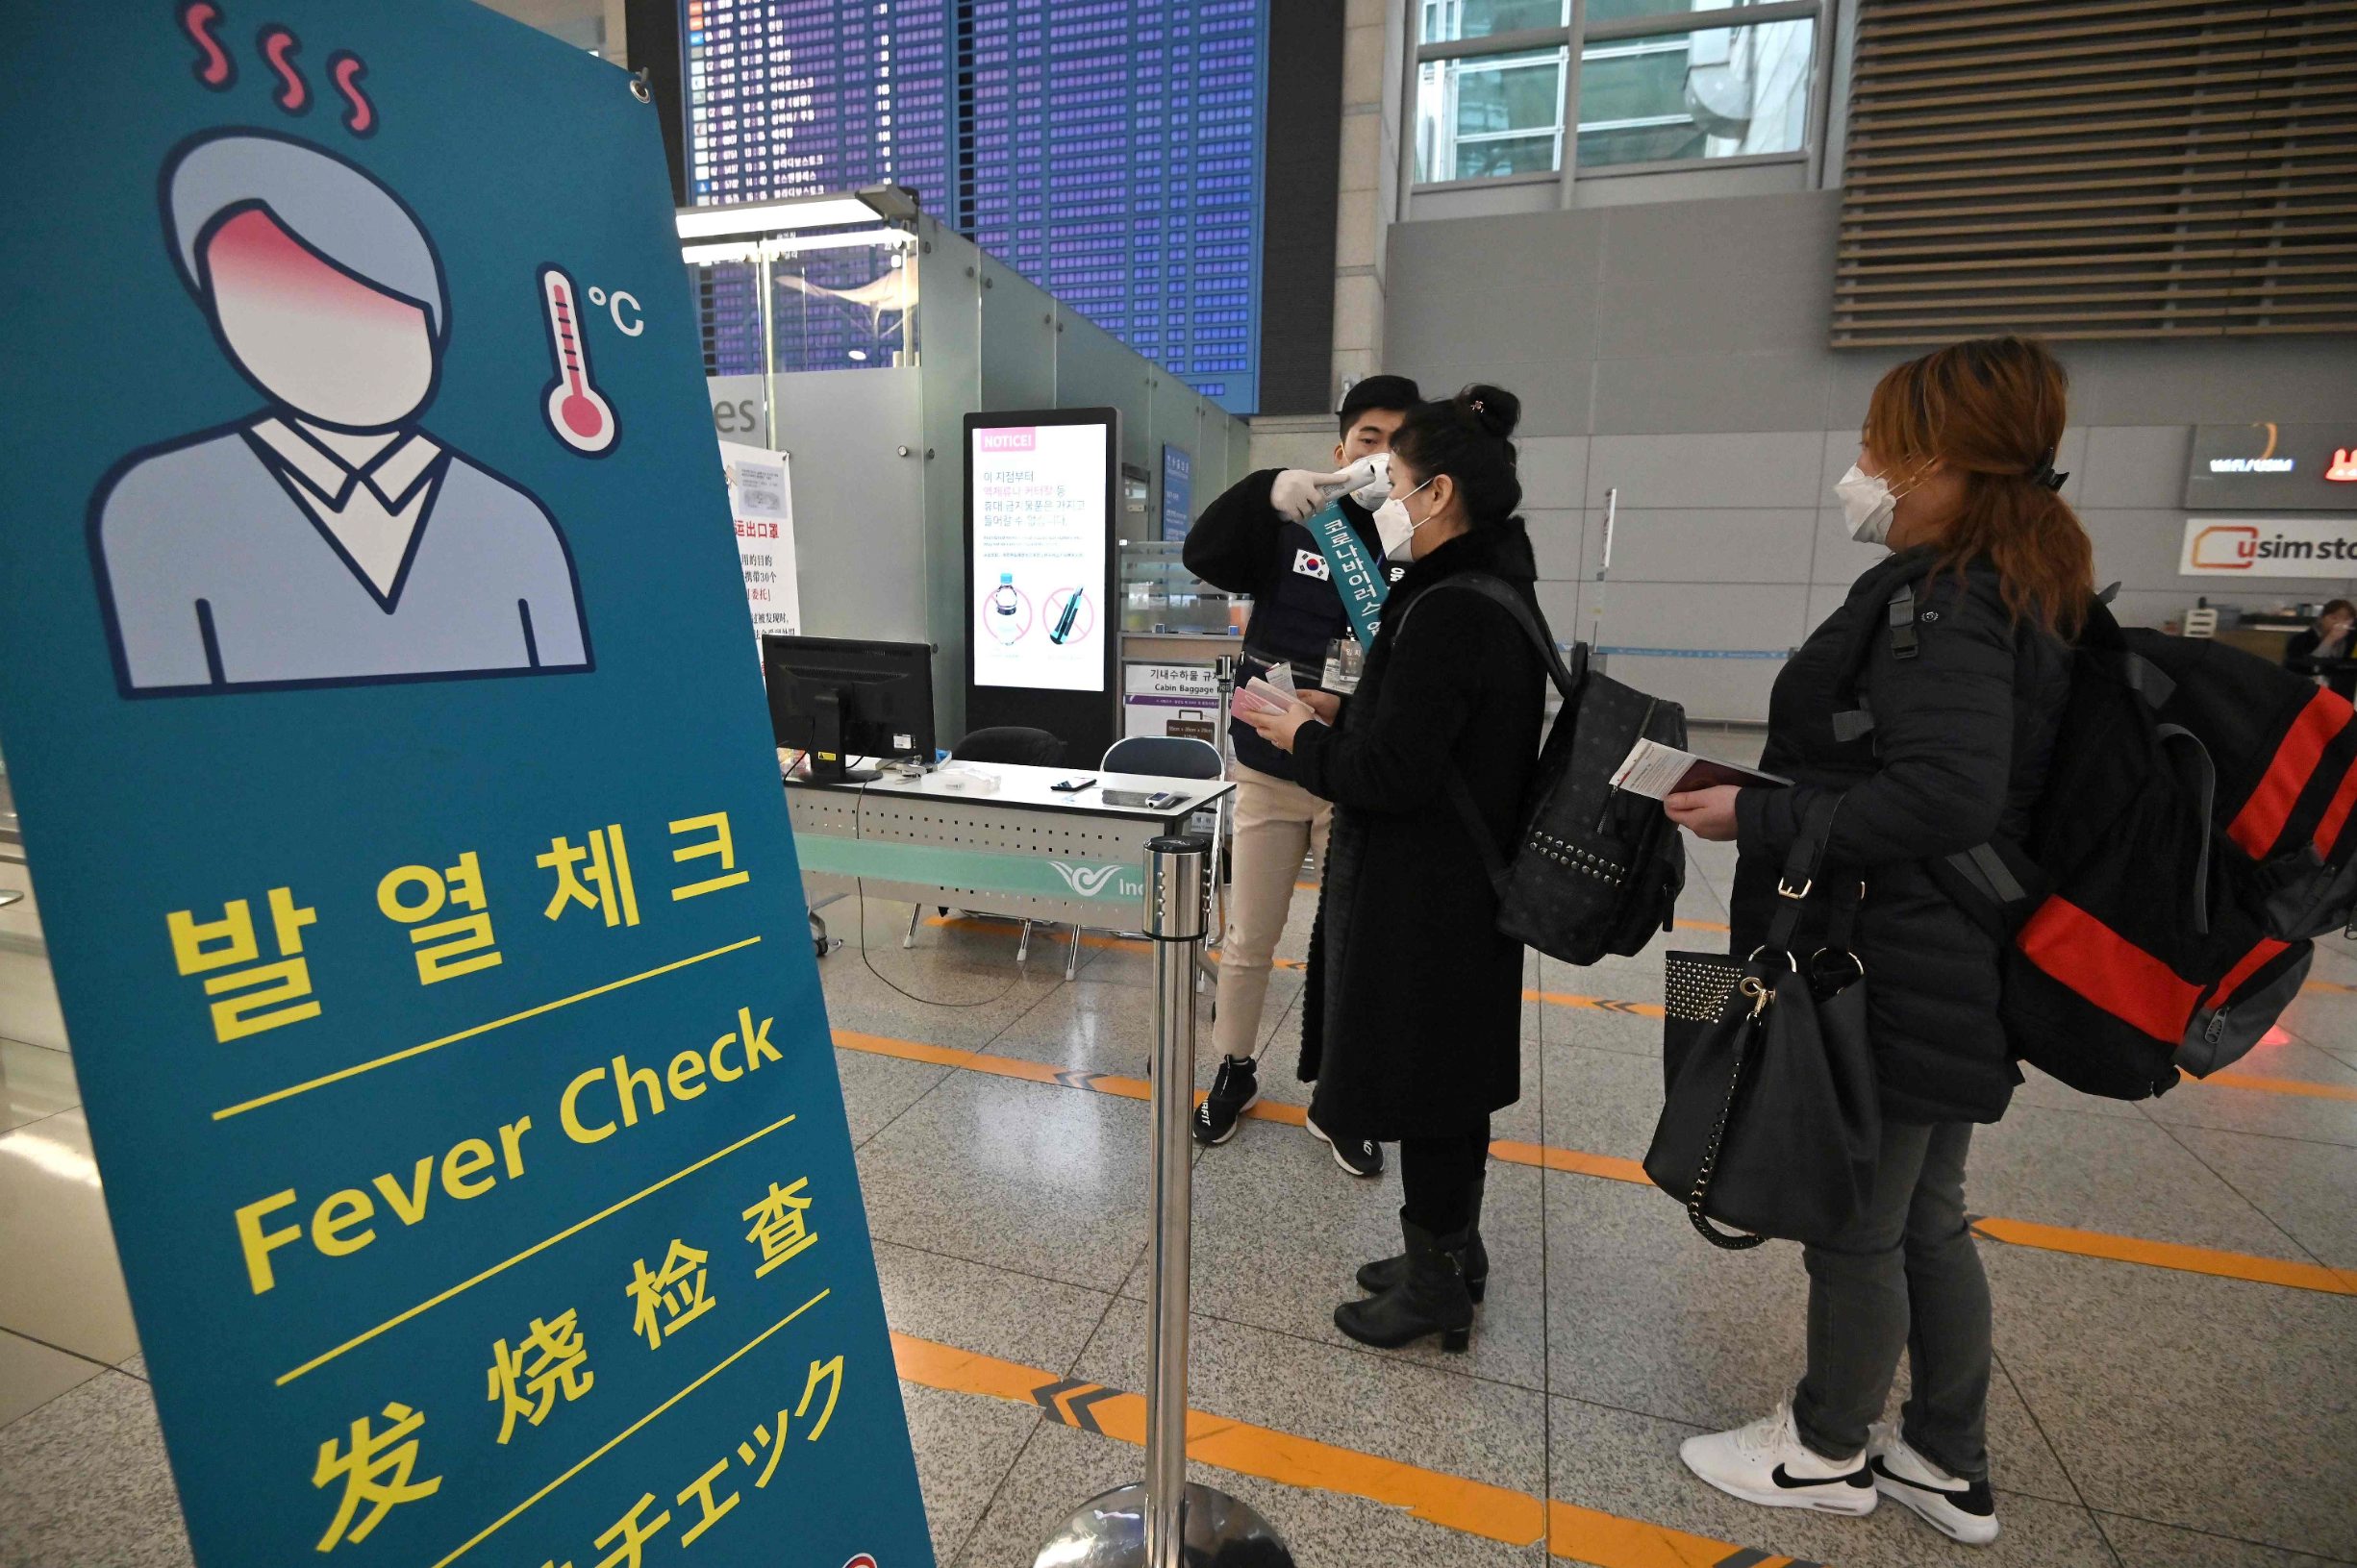 A member of the South Korean military support team (L) checks the body temperature of a passenger at a gate in the departure hall at Incheon international airport, west of Seoul, on March 17, 2020. - Airlines have cancelled so many routes as scores of countries have imposed bans or restrictions on arrivals from South Korea amid concerns over the COVID-19 coronavirus outbreak. (Photo by Jung Yeon-je / AFP)